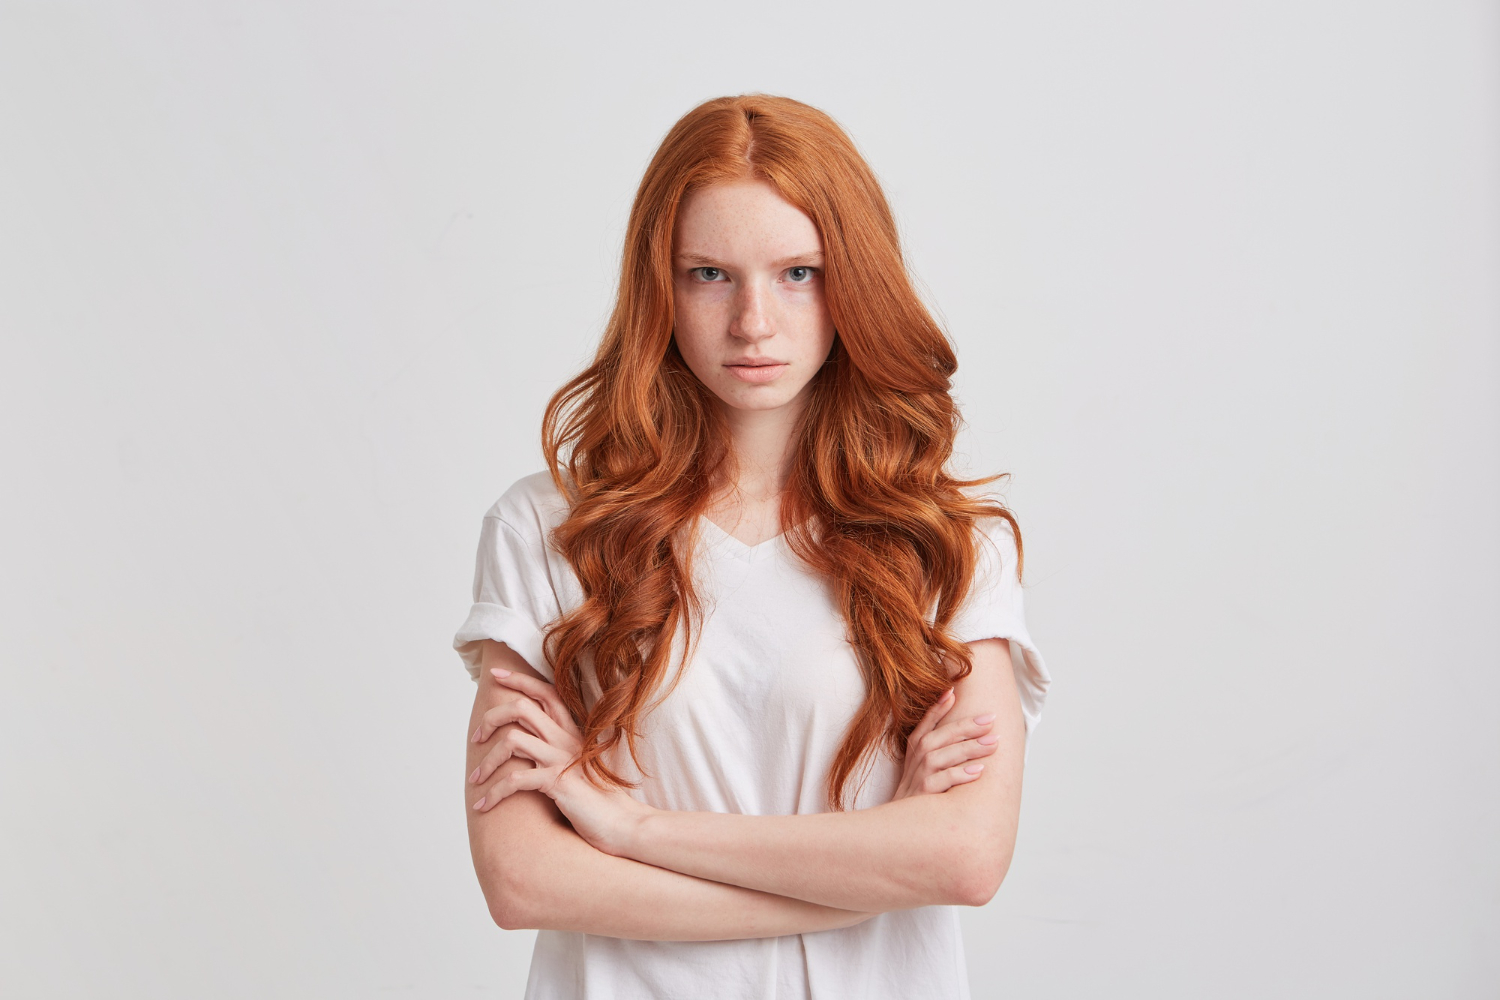 portrait cheerful pretty redhead young woman with long wavy hair kathryn looking upset